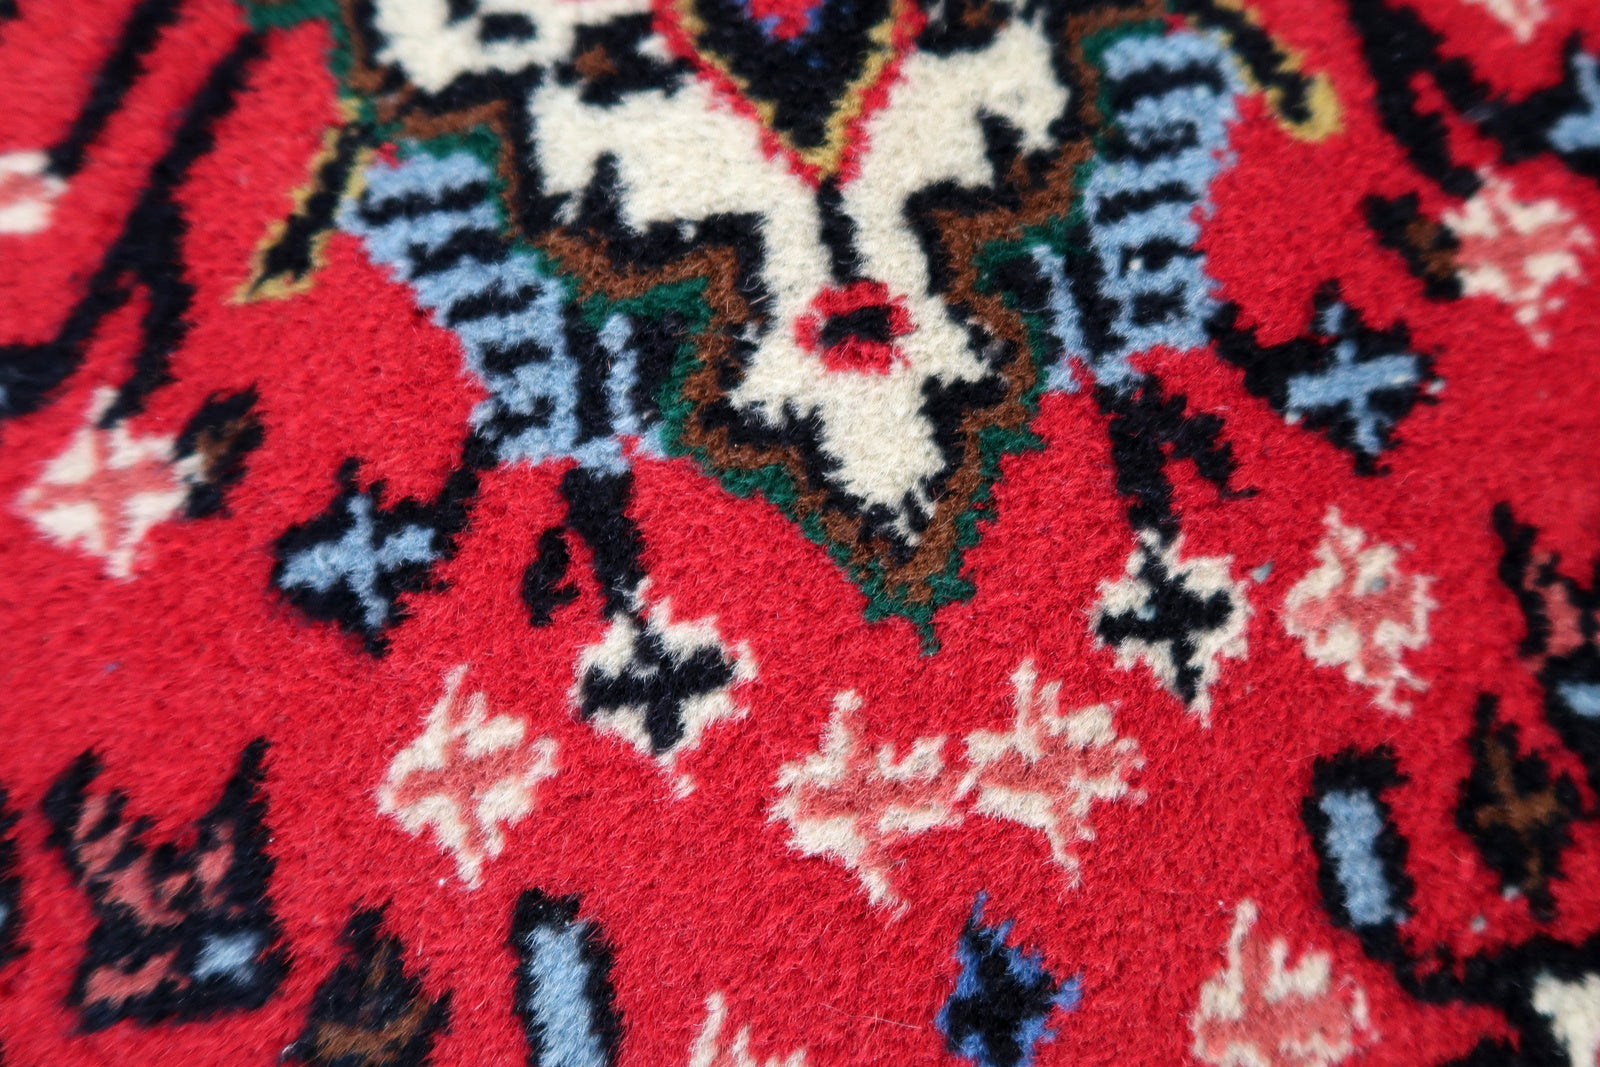 Handmade vintage Middle Eastern rug in bright colors. The rug is from the end of 20th century in original good condition.